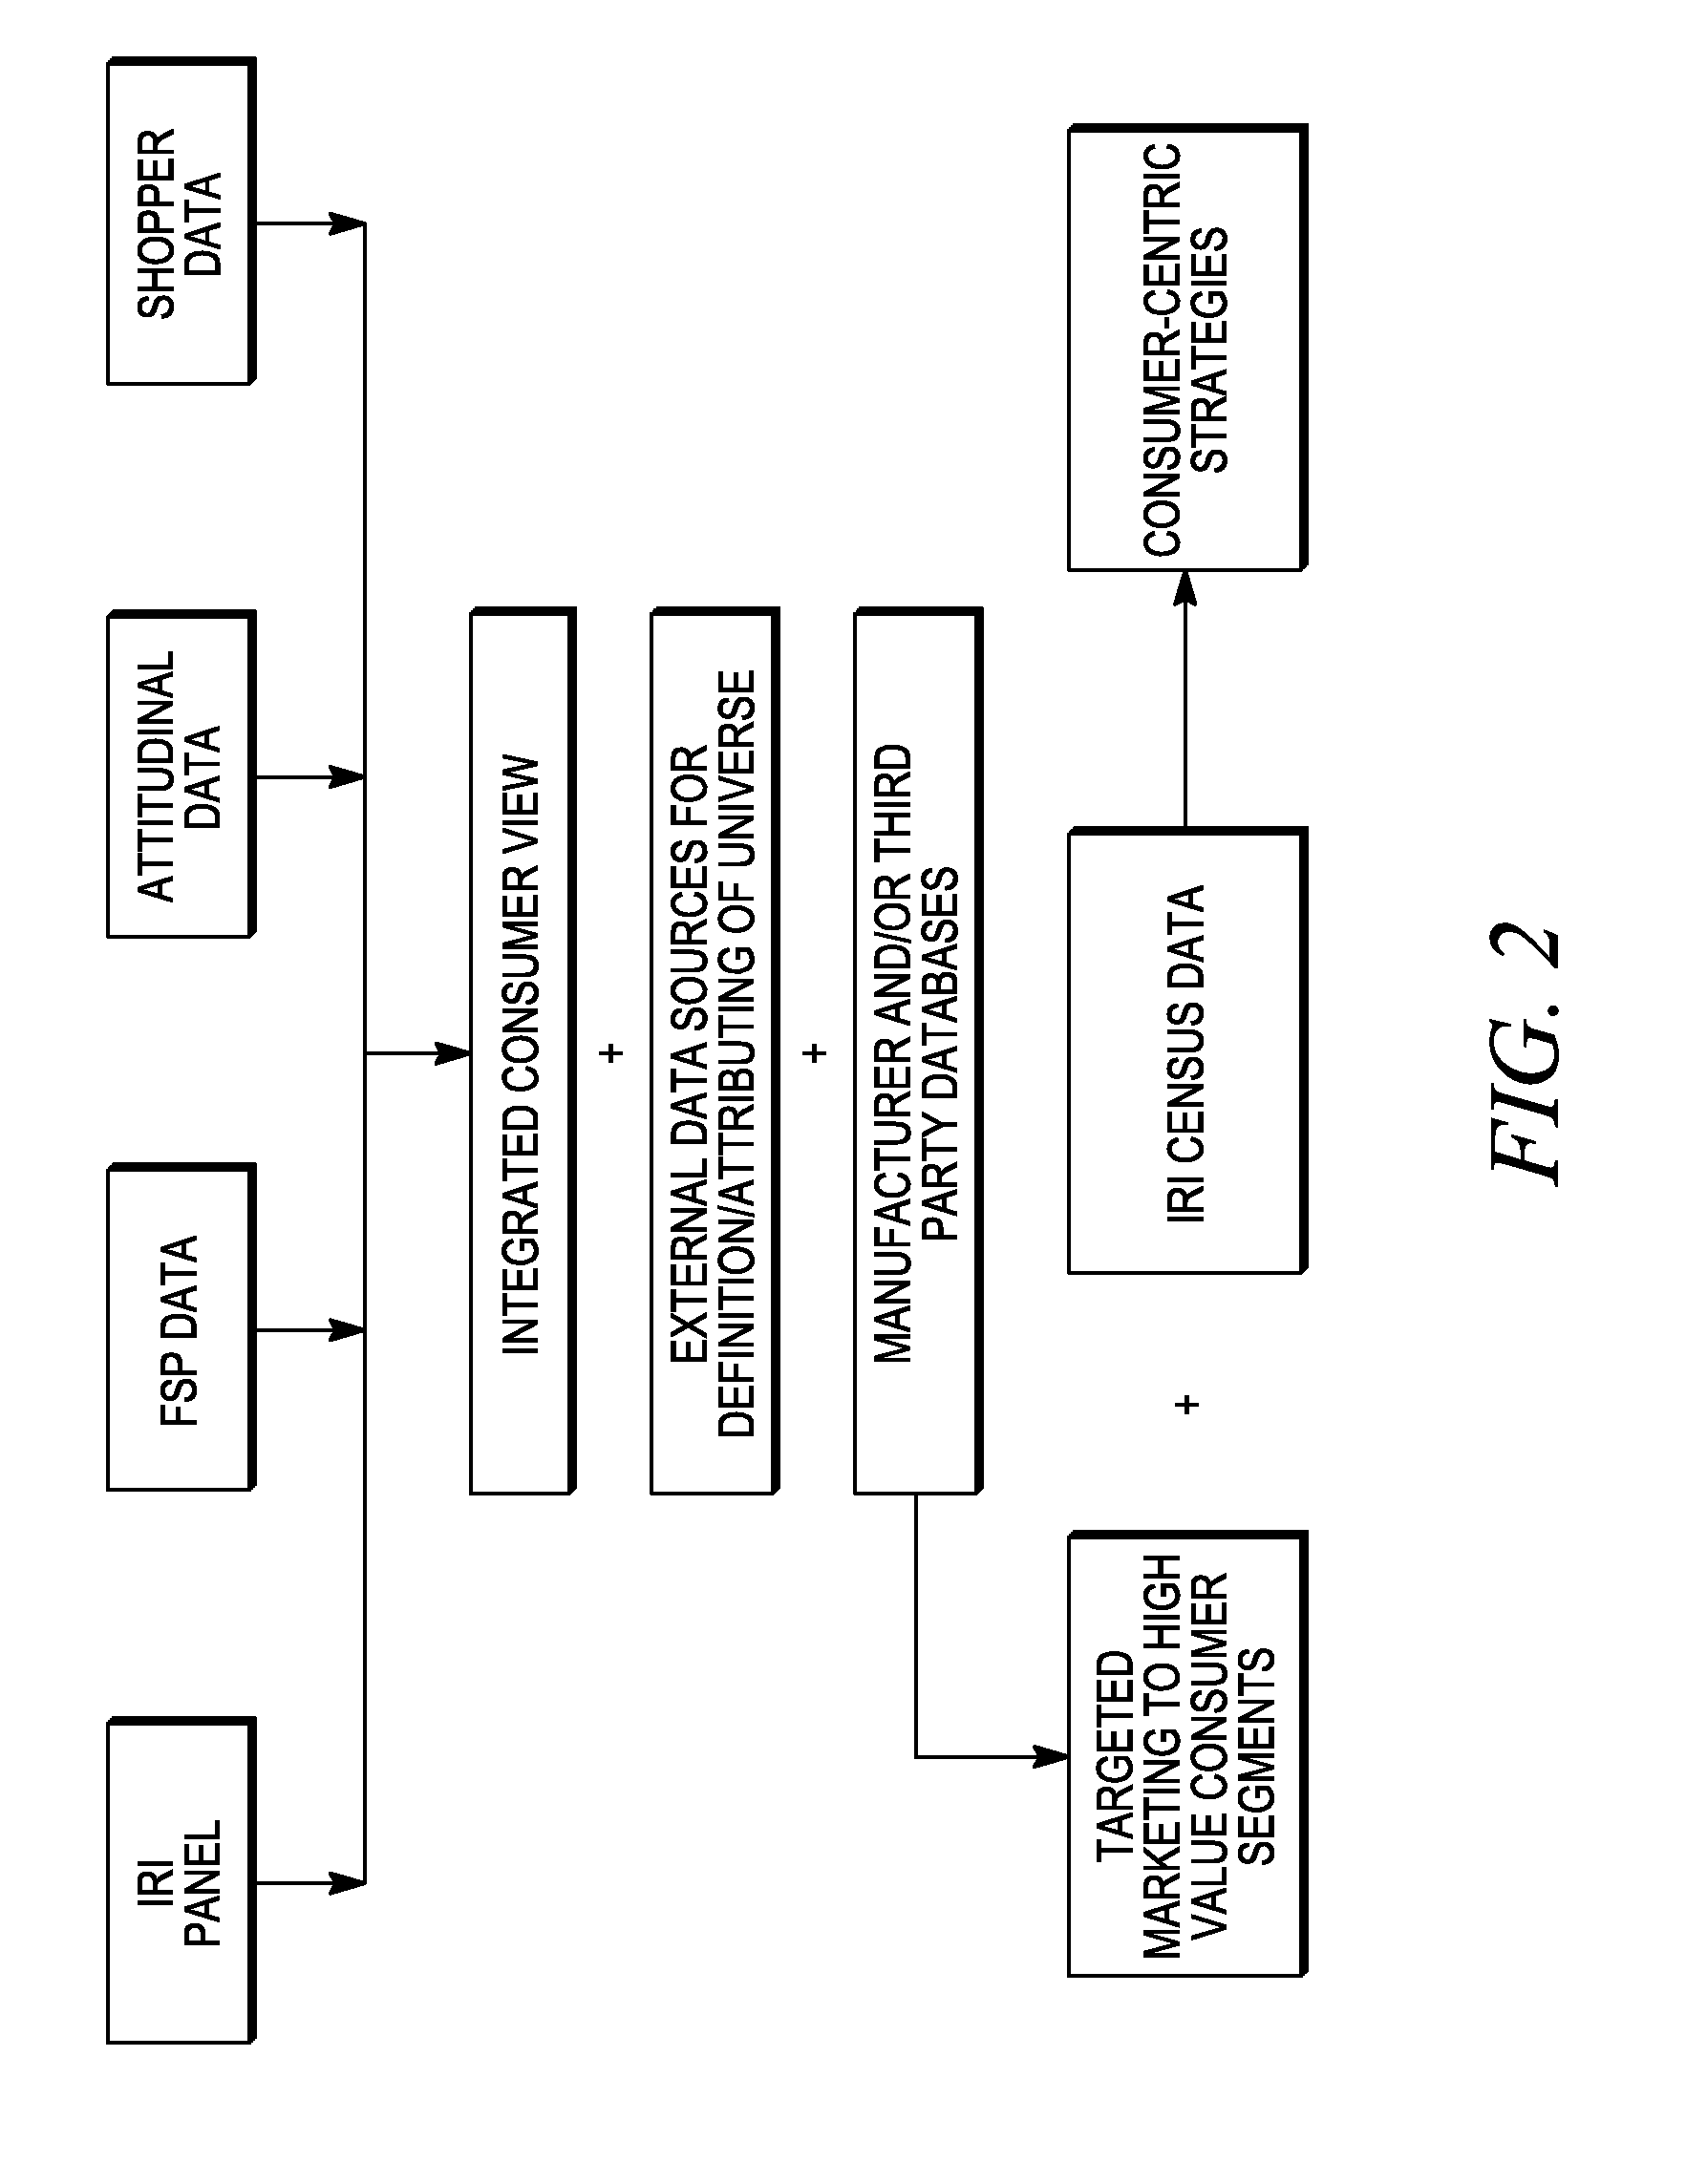 Bias reduction using data fusion of household panel data and transaction data